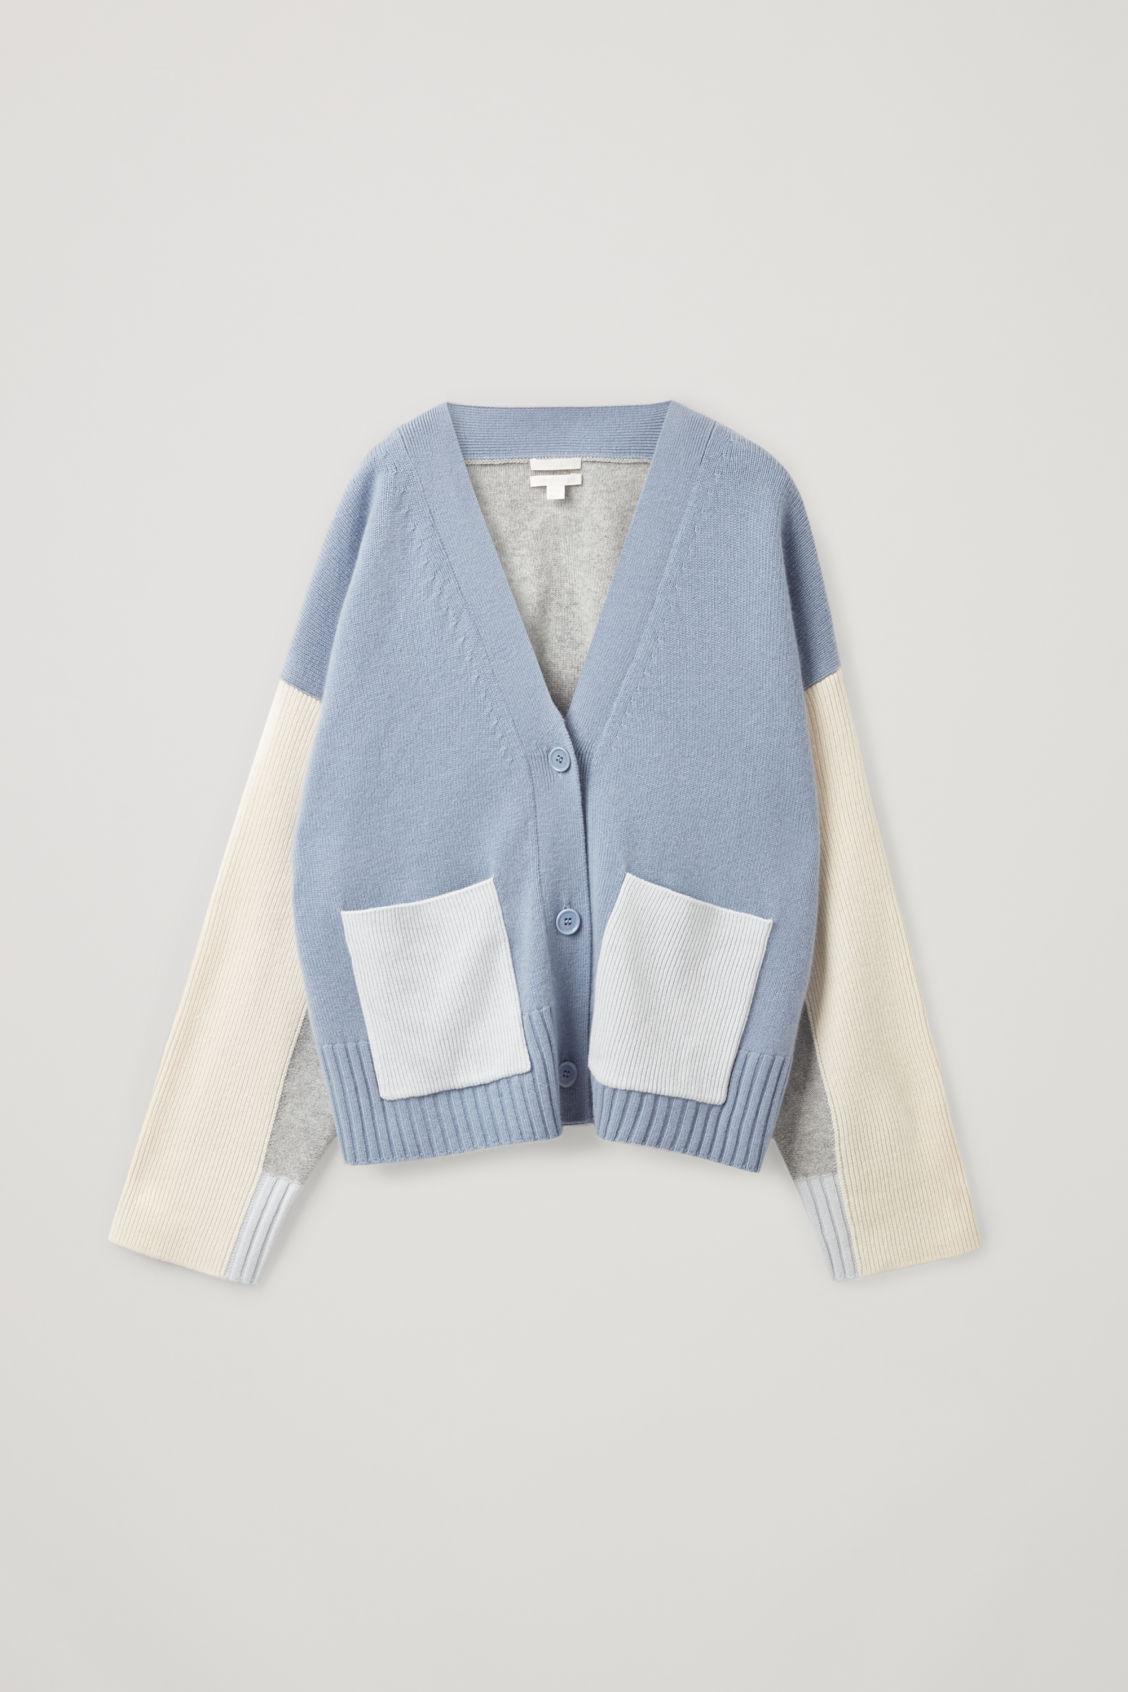 COS Cashmere Contrast Panel Cardigan in Blue | Lyst